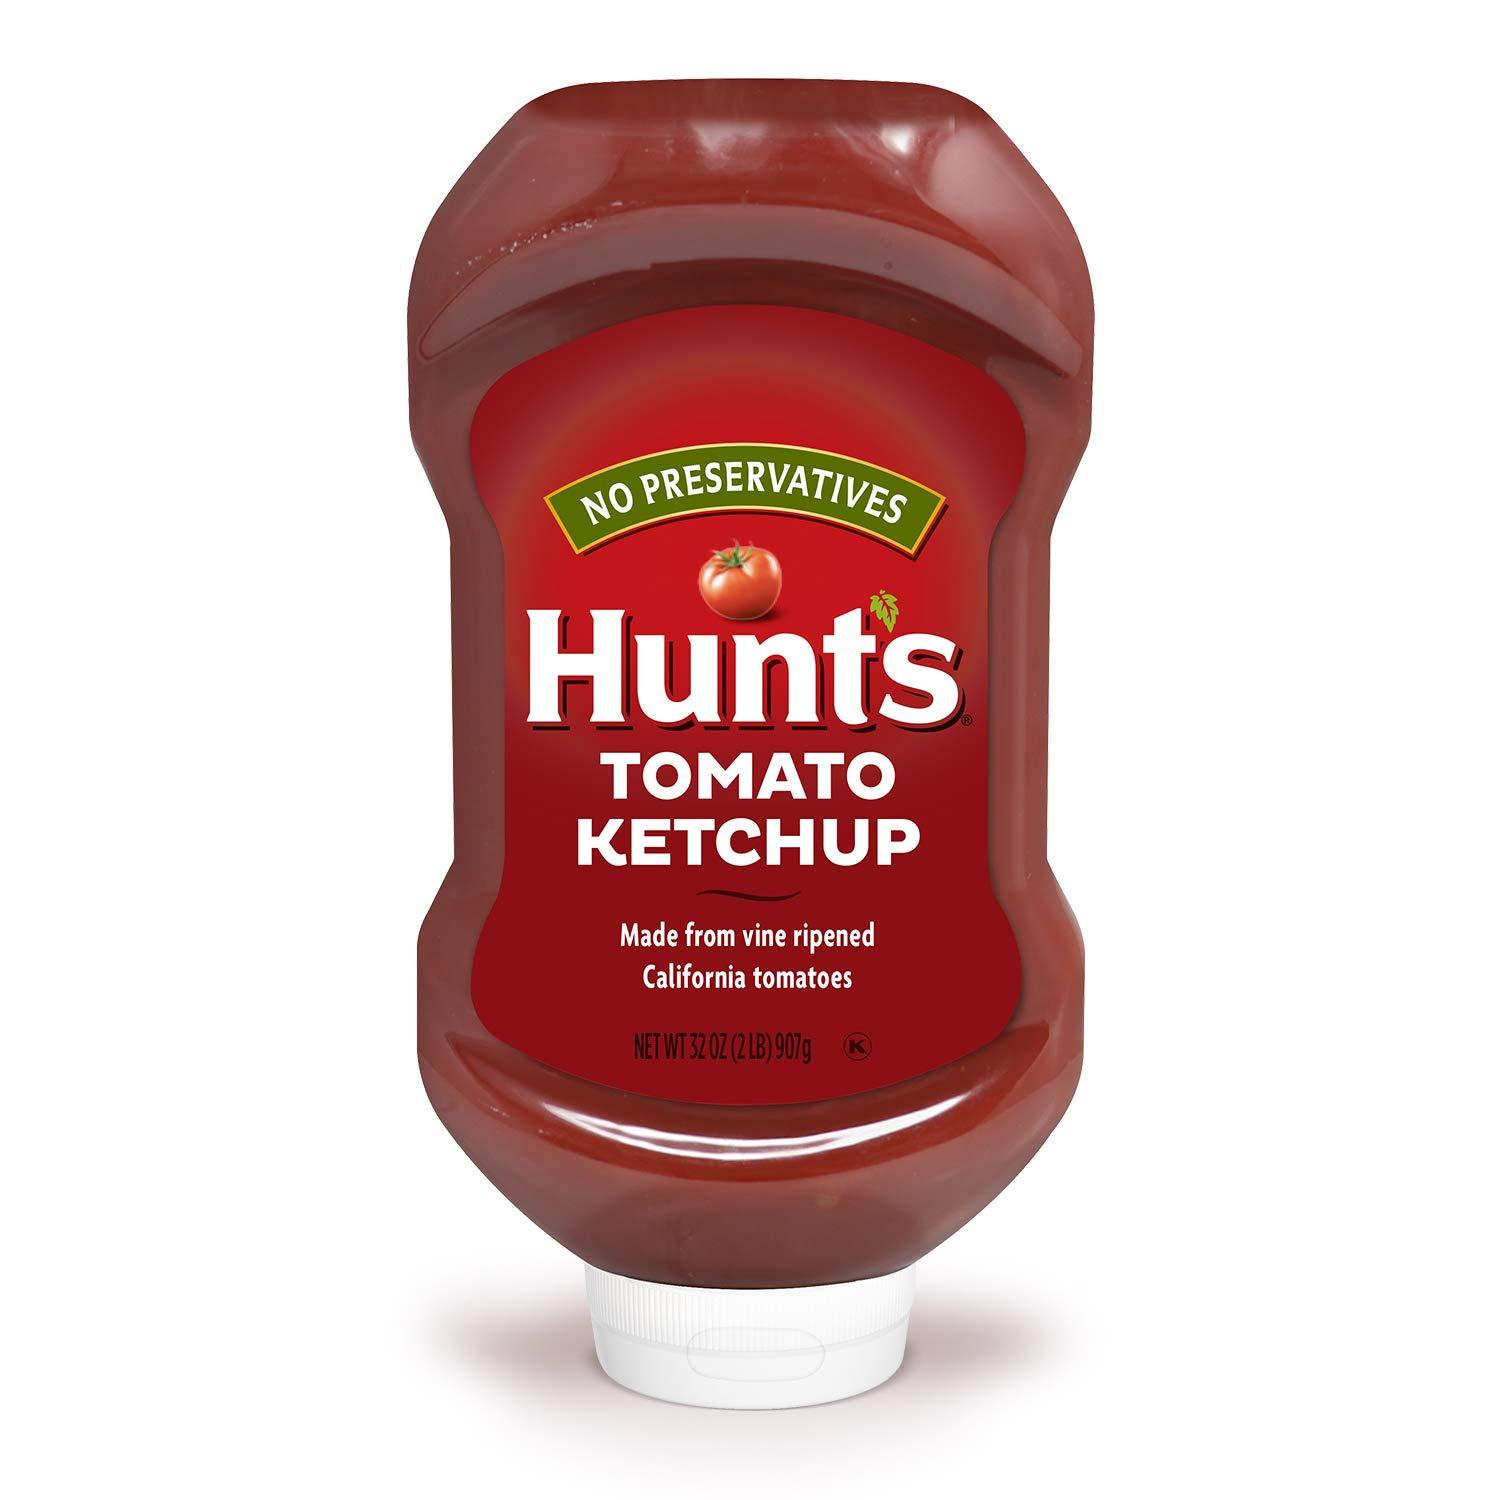 Hunts Tomato Ketchup Squeeze Bottle for $1.47 Shipped